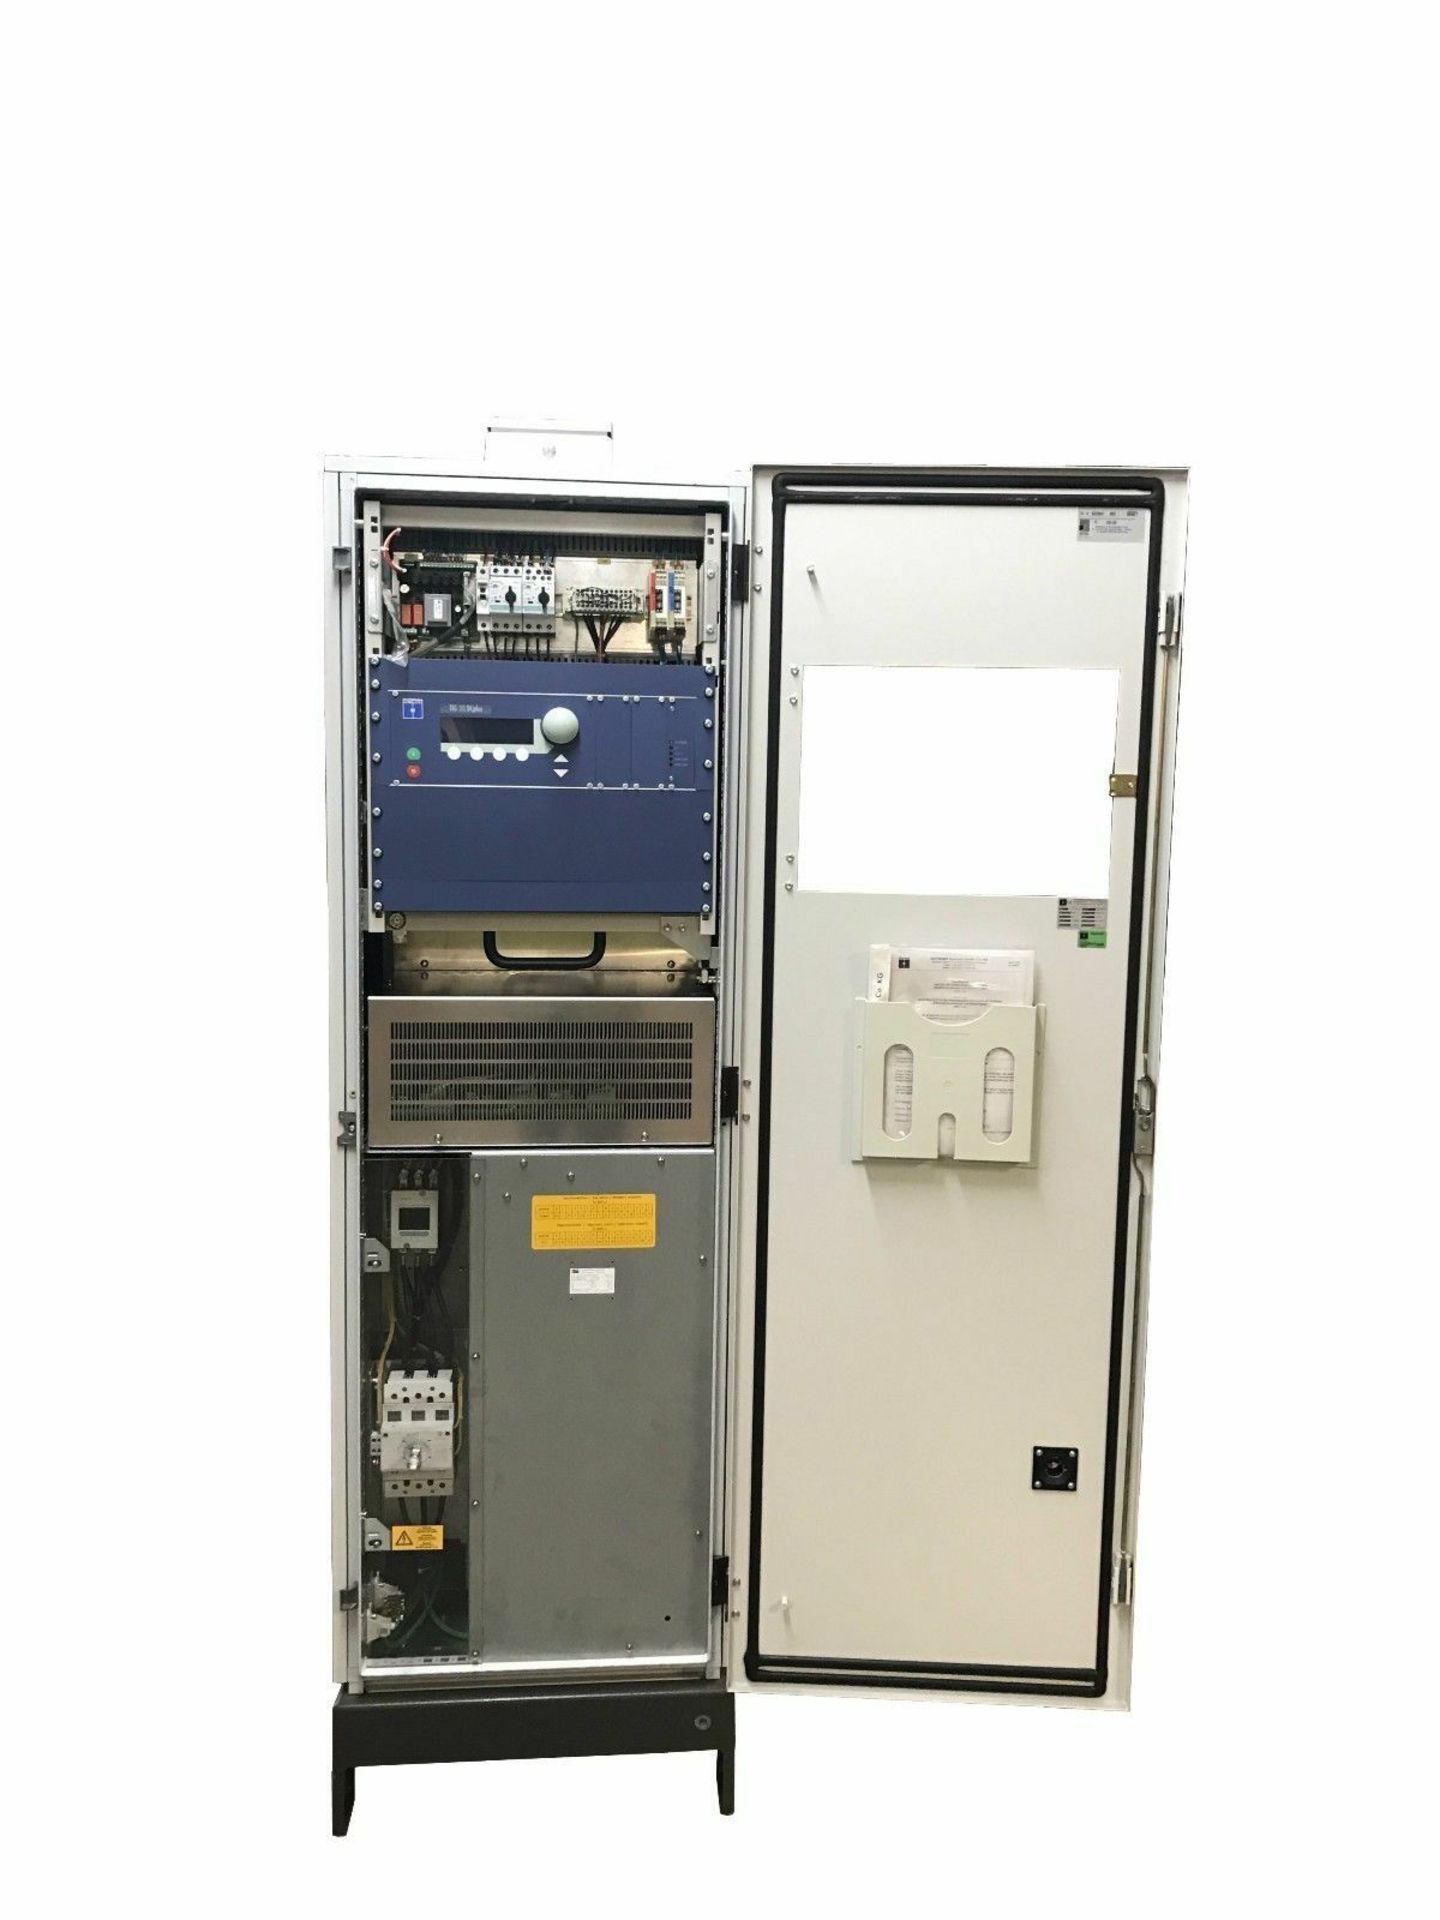 NEW IN CRATE -TRUMPF HUTTINGER ELEKTRONIK GMBH TIG 30 DC PLUS 400V 48A 30KW POWER SUPPLY - Image 3 of 5